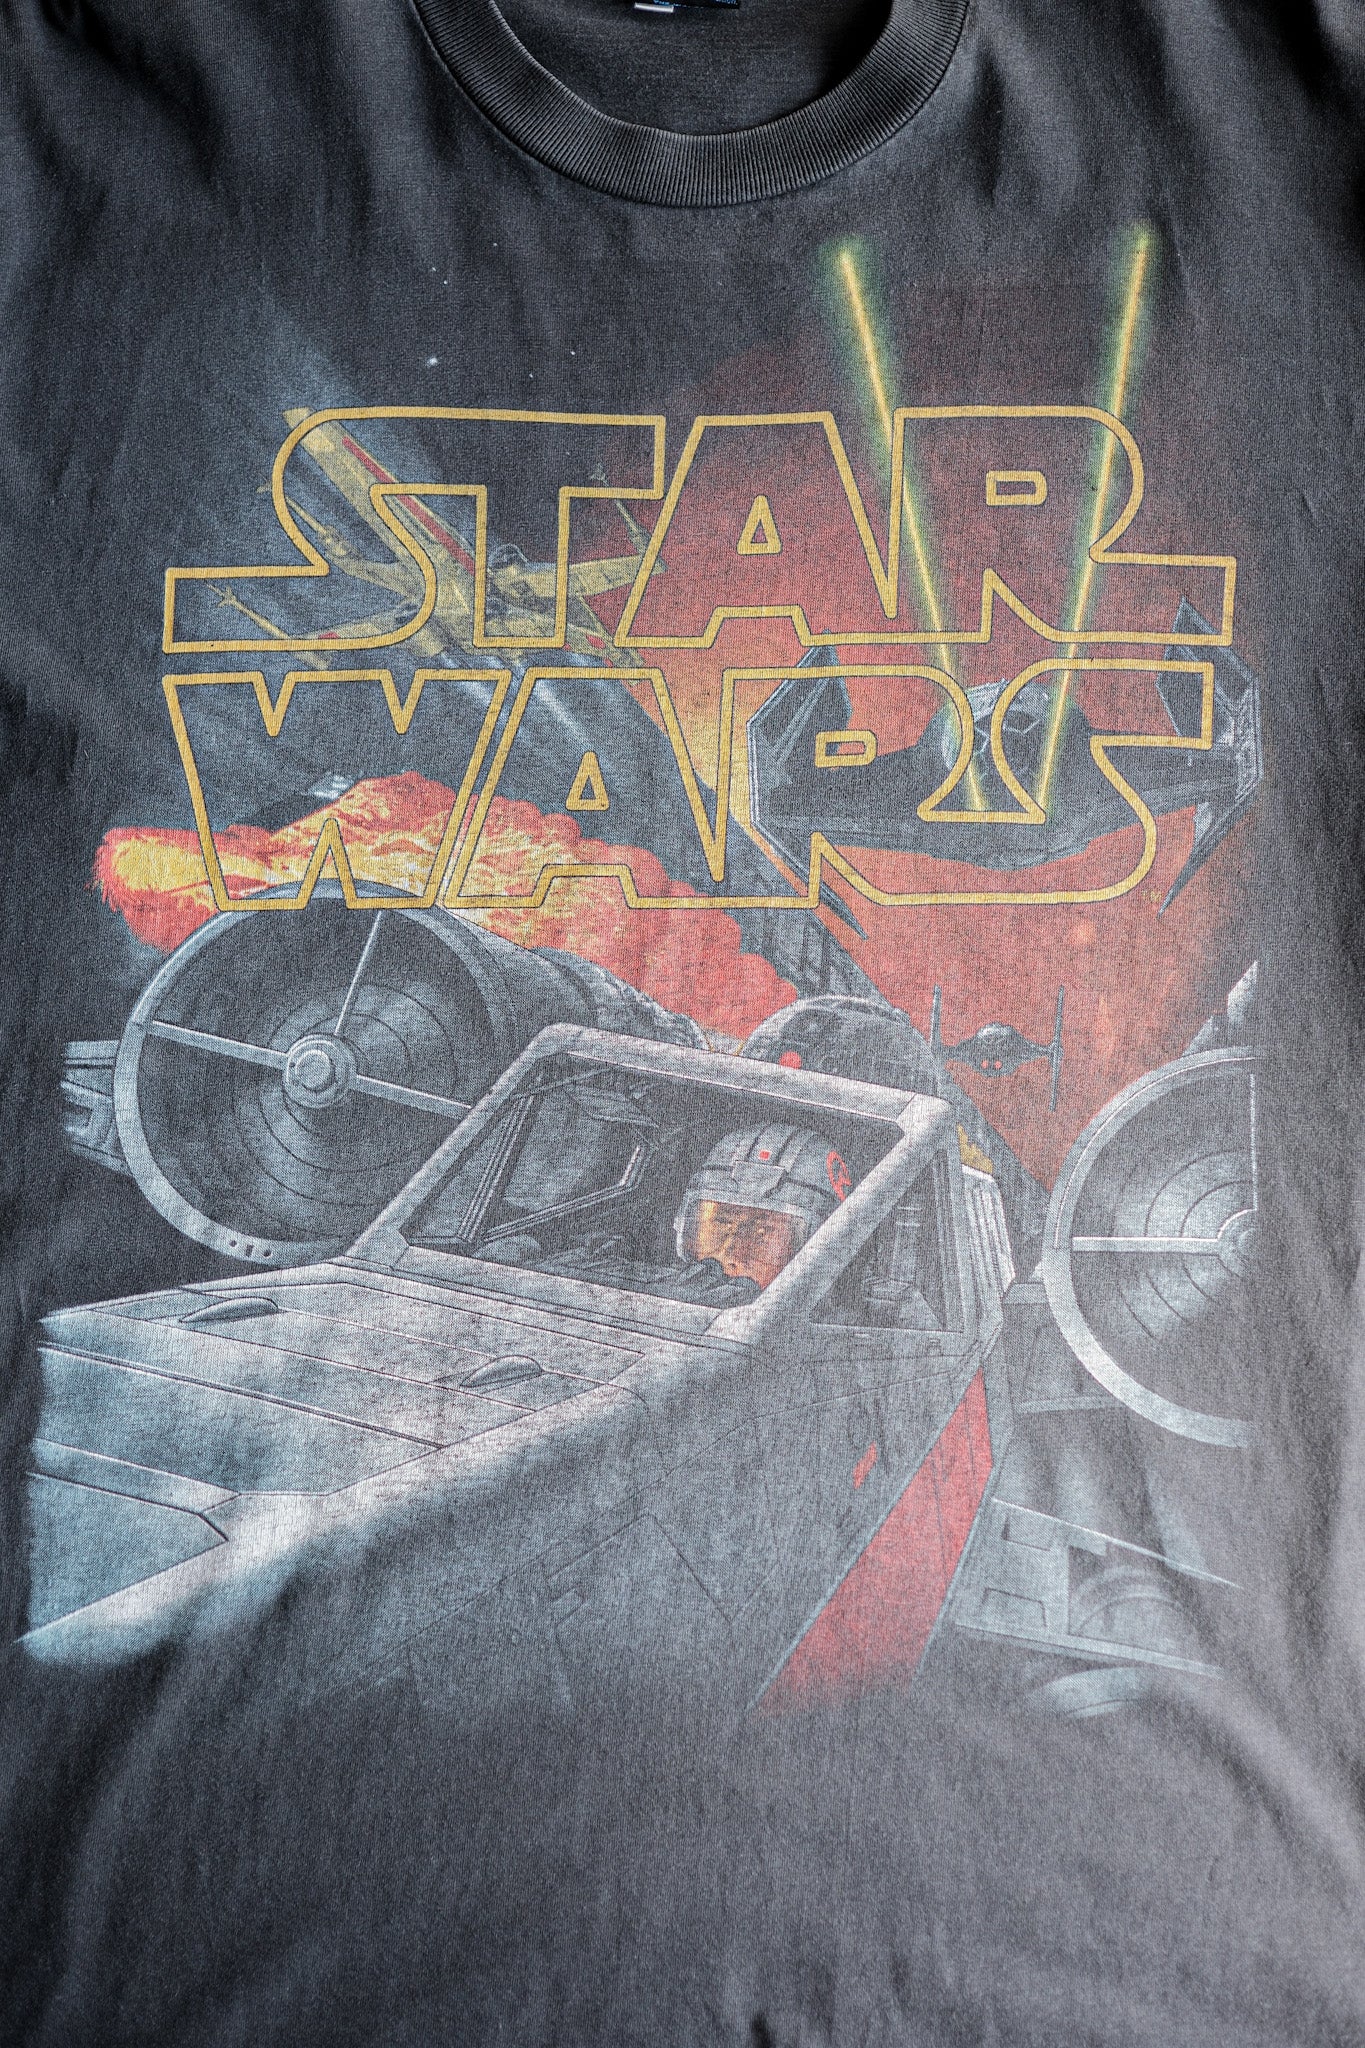 【~90's】Vintage Movie Print T-shirt Size.L "Star Wars" "Made in U.S.A."